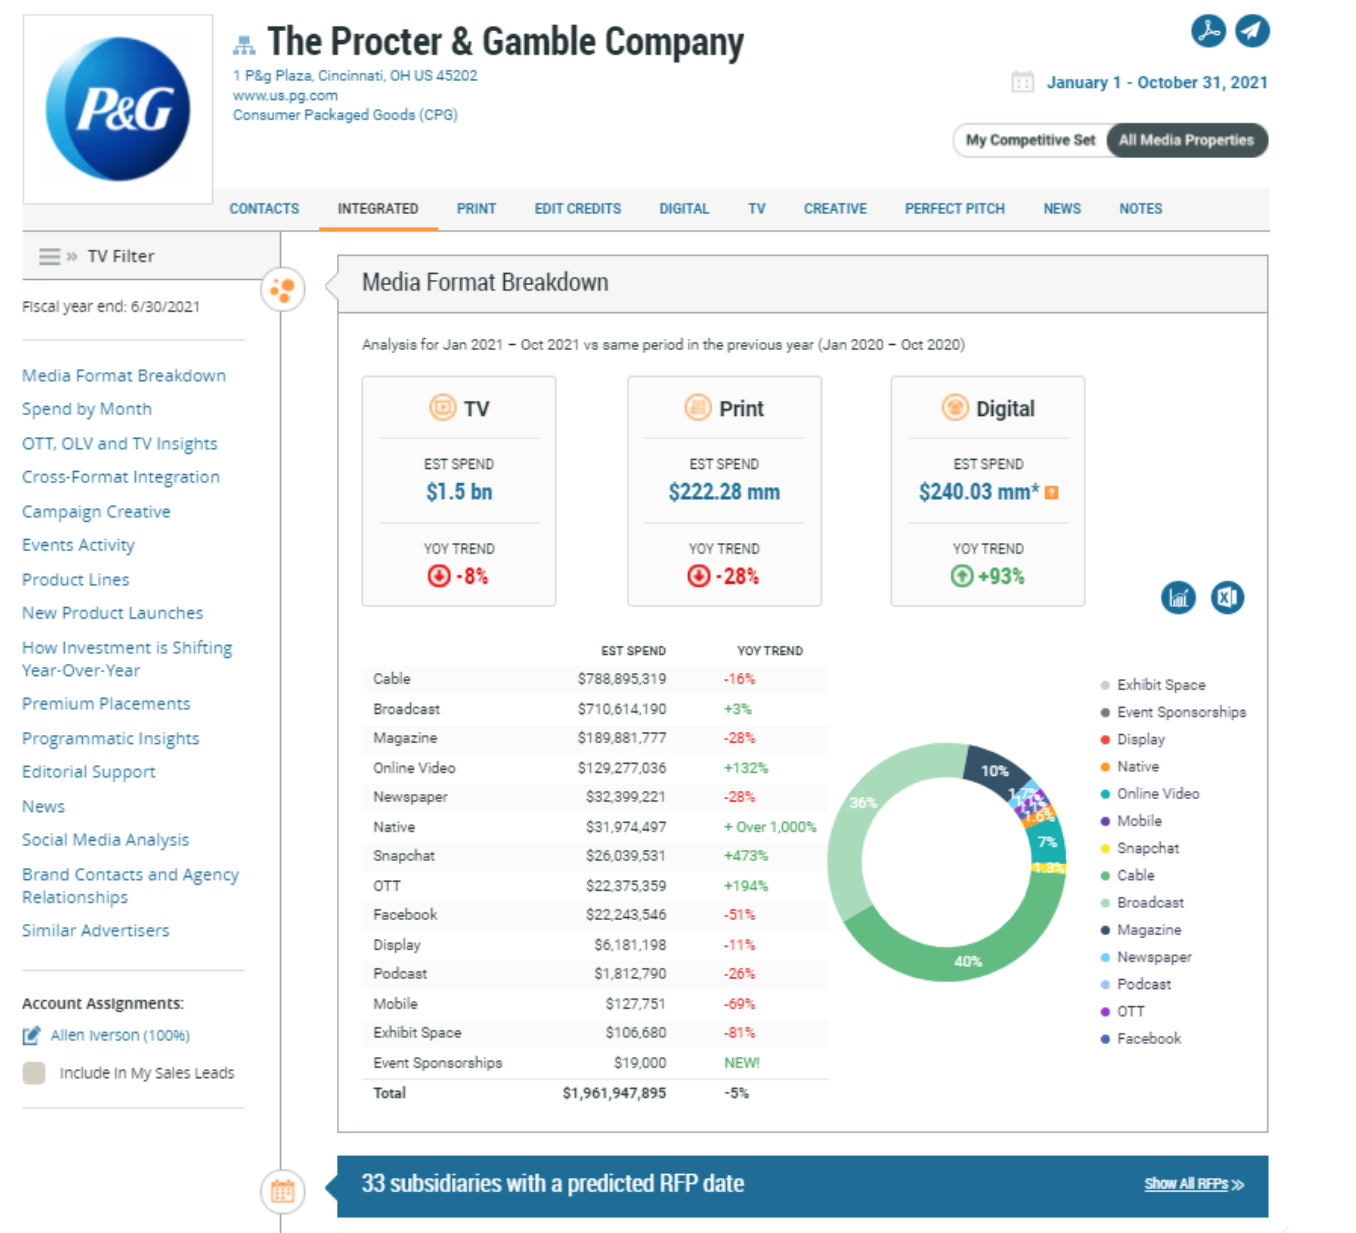 The Procter & Gamble Company Advertising Profile Chart